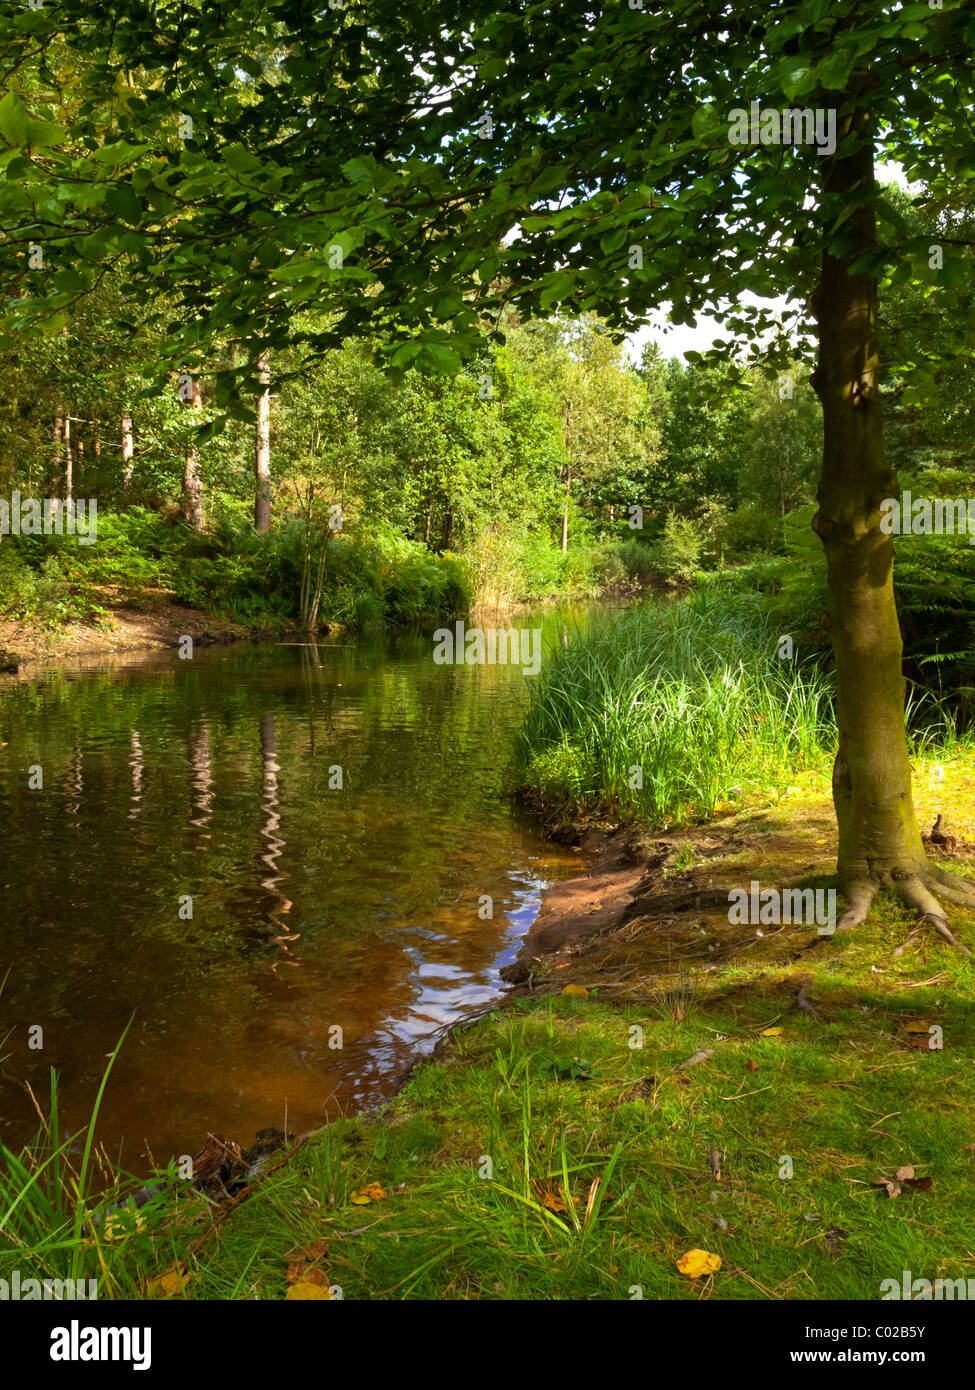 Stream and pine trees at Center Parcs Sherwood Forest near Rufford in Nottinghamshire England UK opened in 1987 Stock Photo